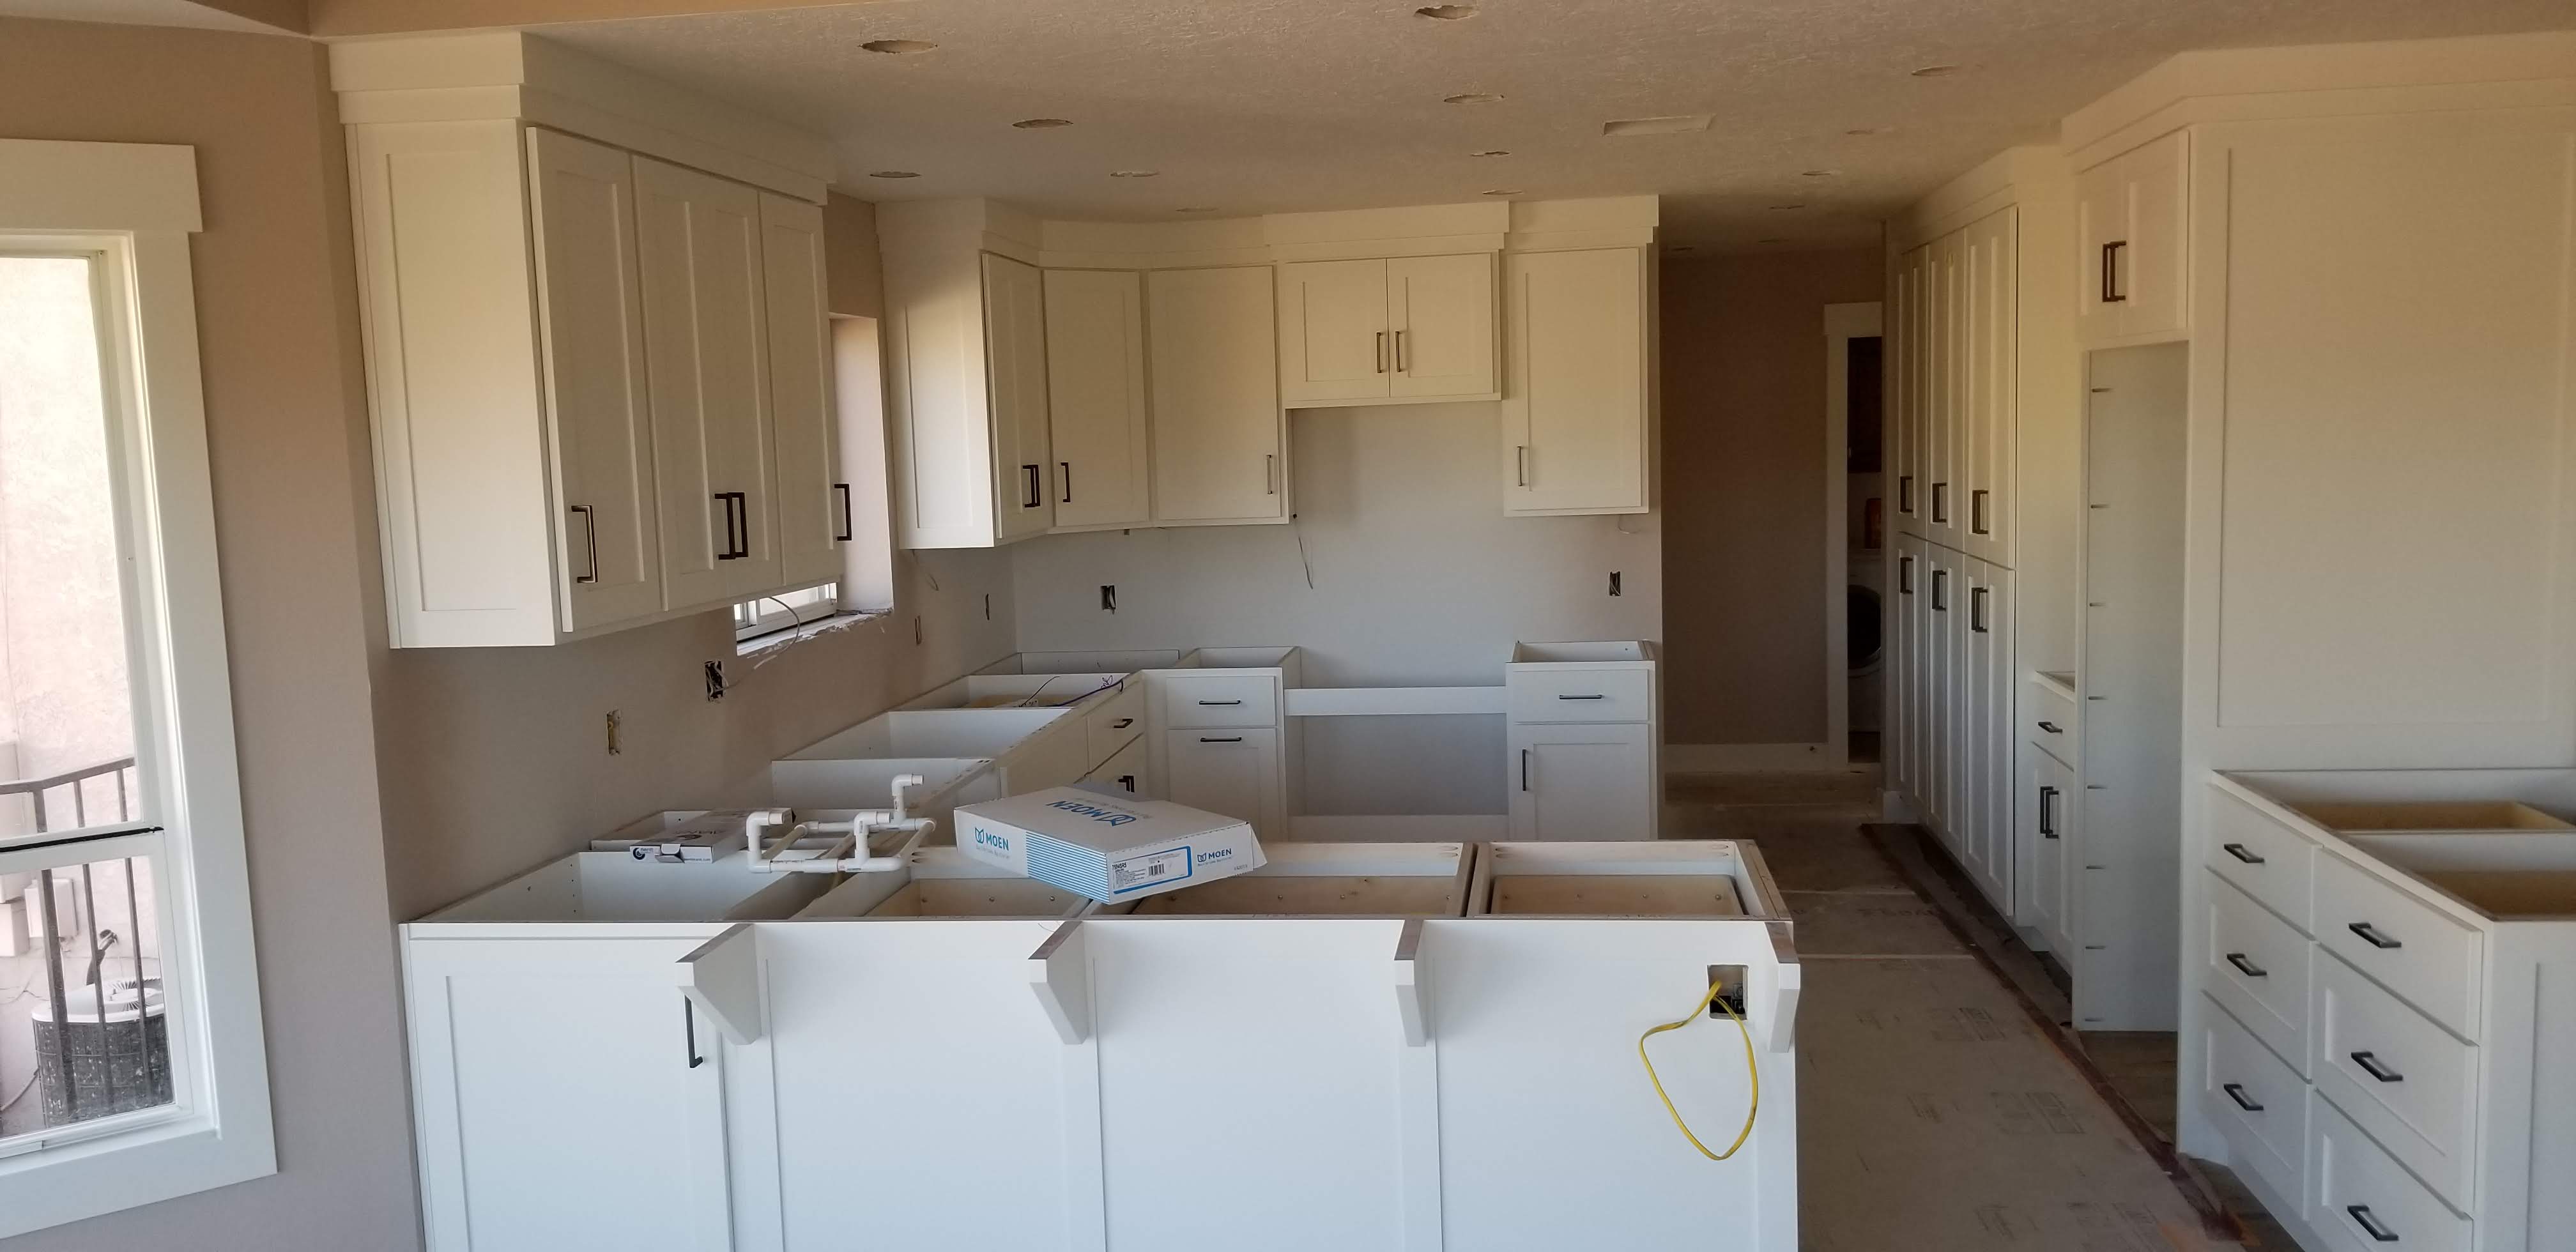 Cabinets Installed Remodel Process